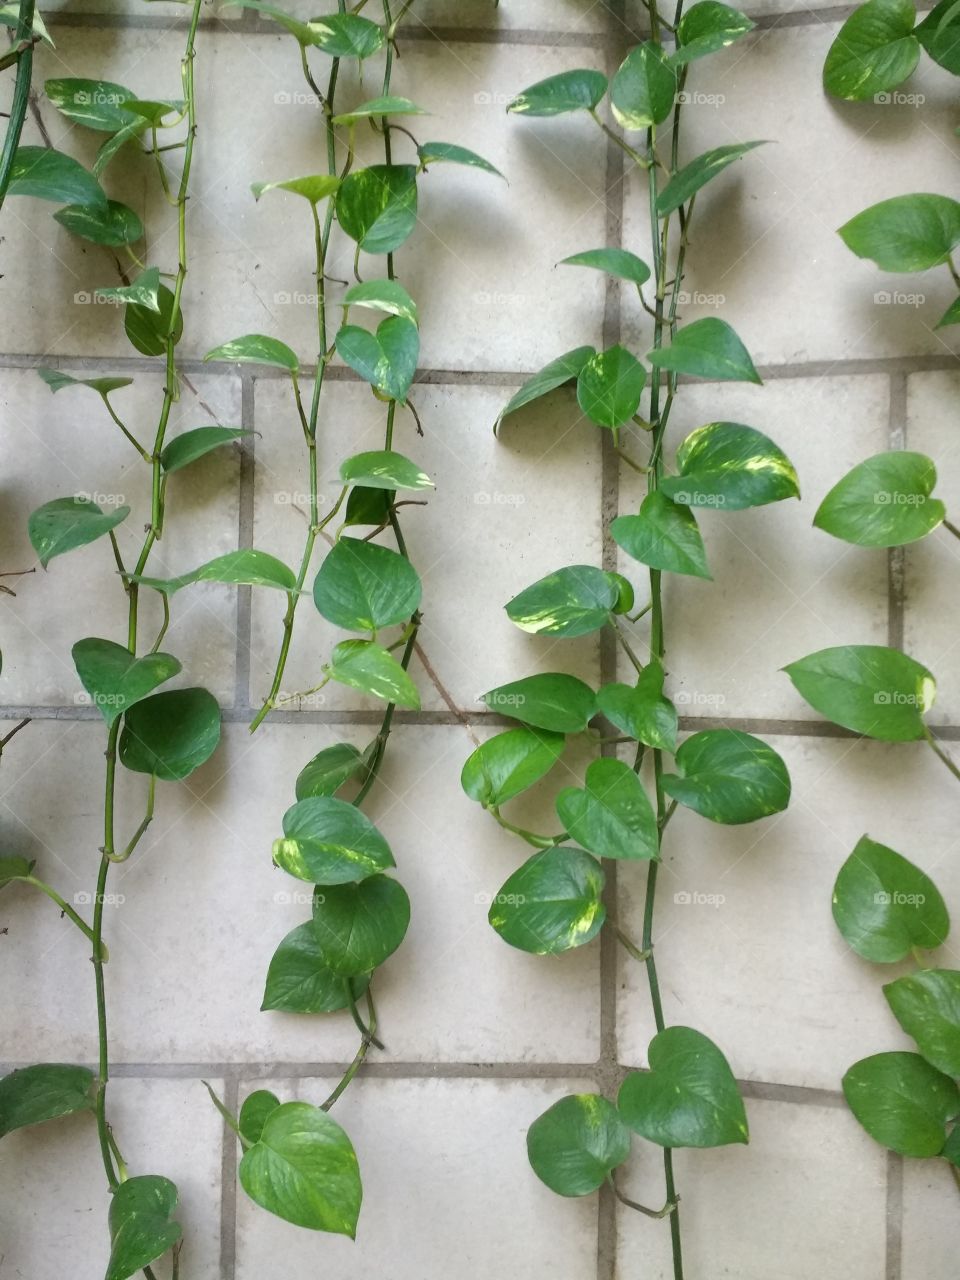 Green climbing vines on a white tiled wall